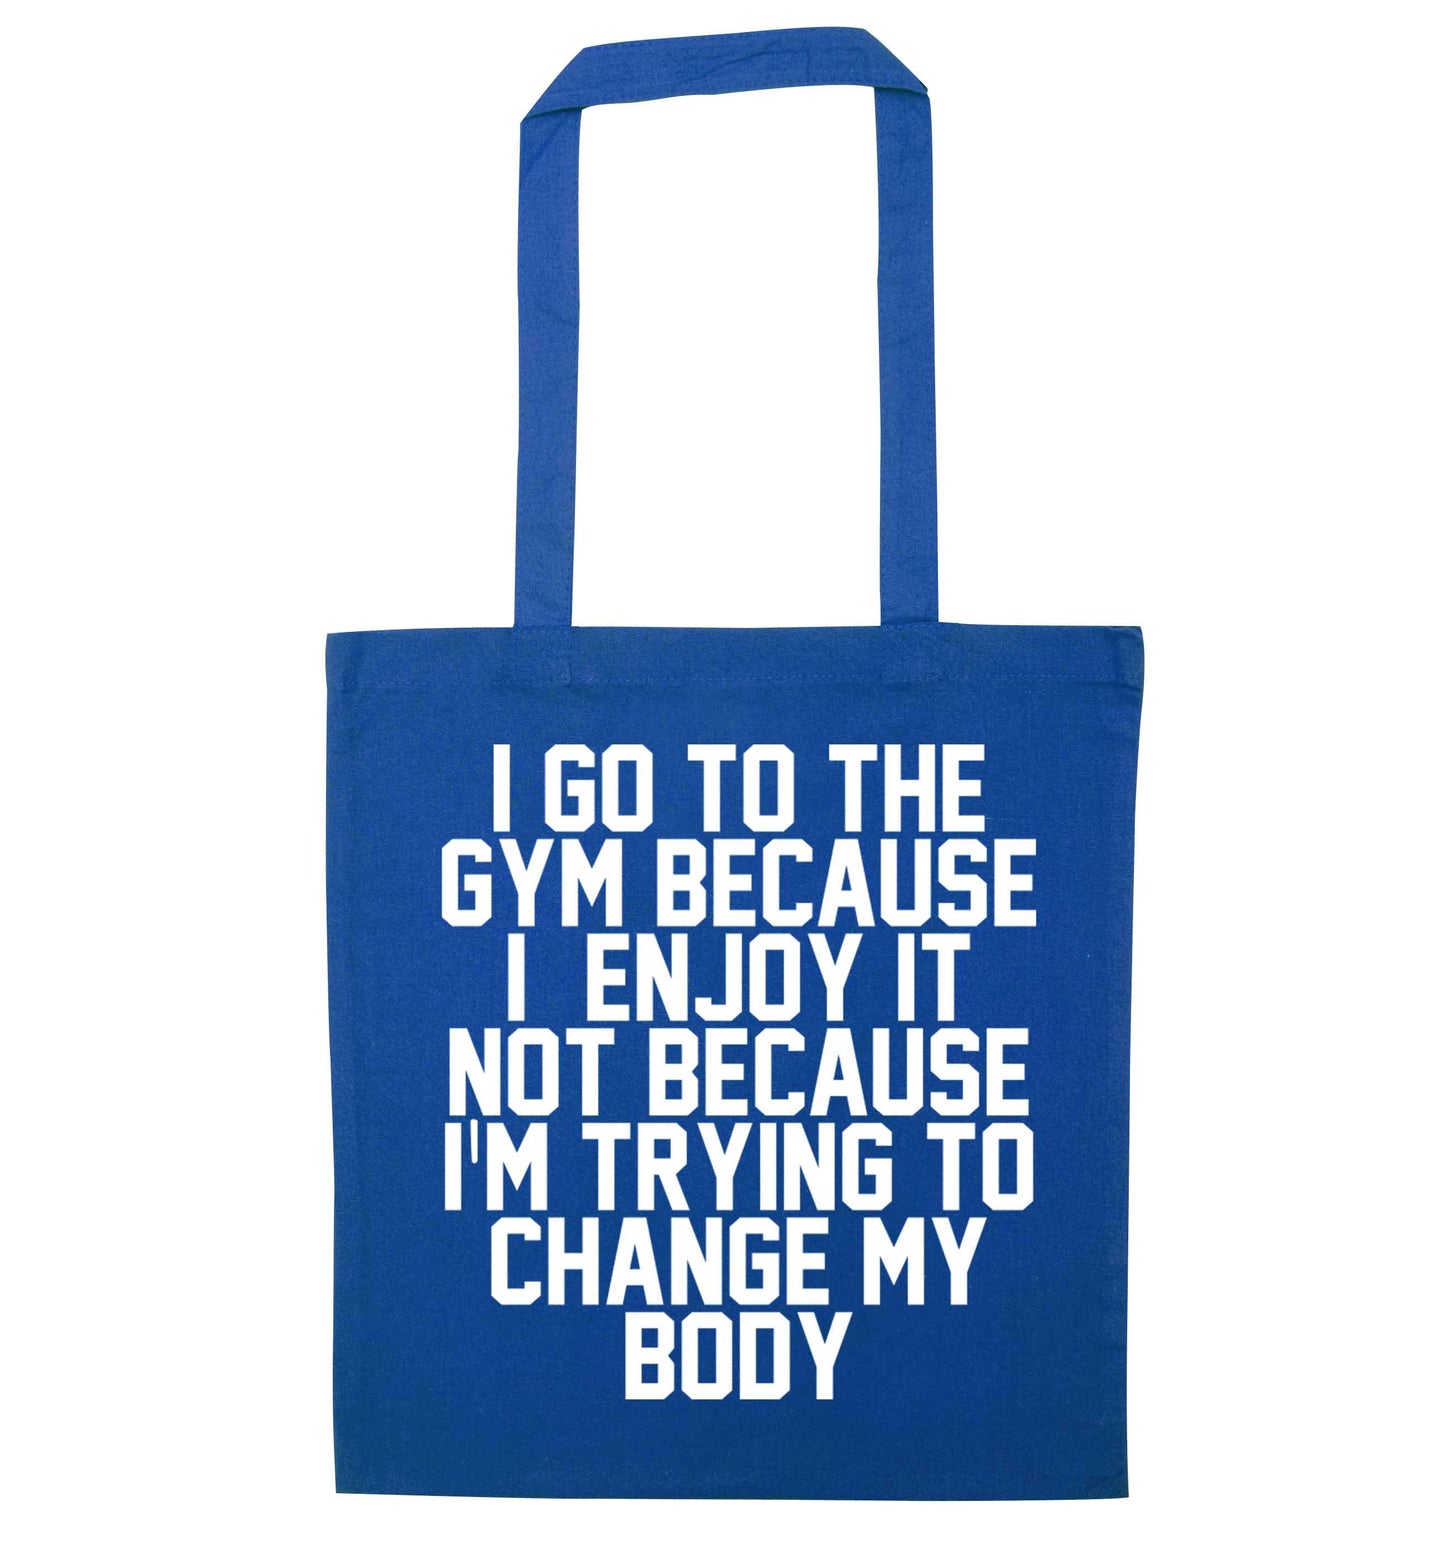 I go to the gym because I enjoy it not because I'm trying to change my body blue tote bag